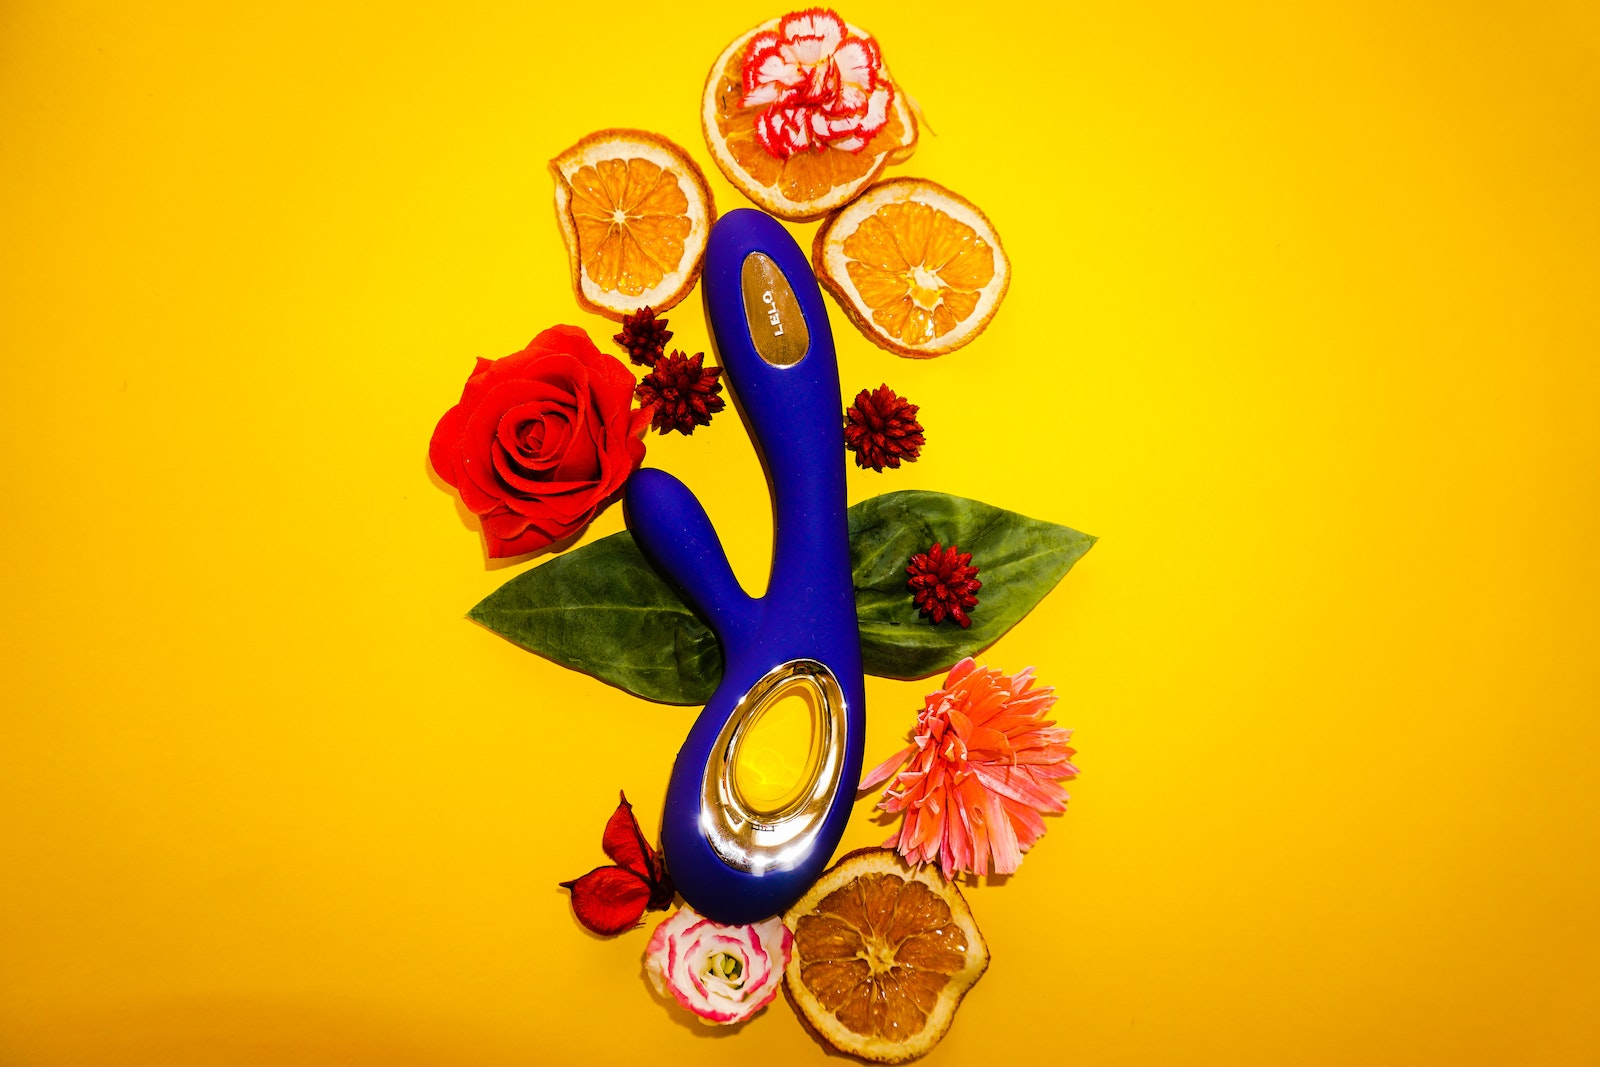 A Vibrator with Flowers and Orange Slices for Decoration Lying Around It